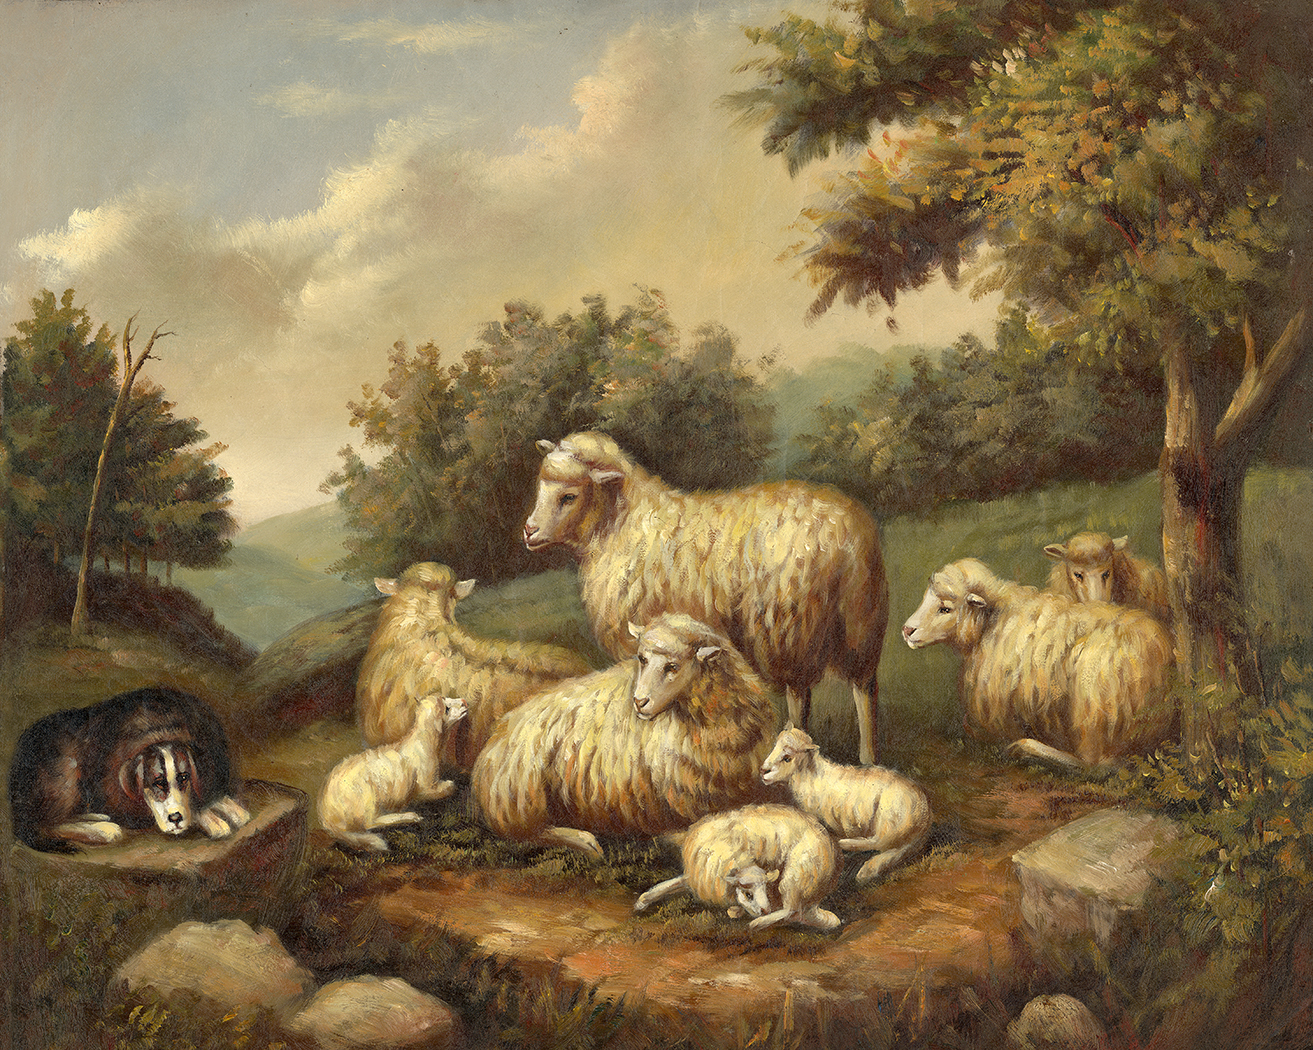 Farm/Pastoral Early American Sheep in a Landscape Framed Oil Painti ...